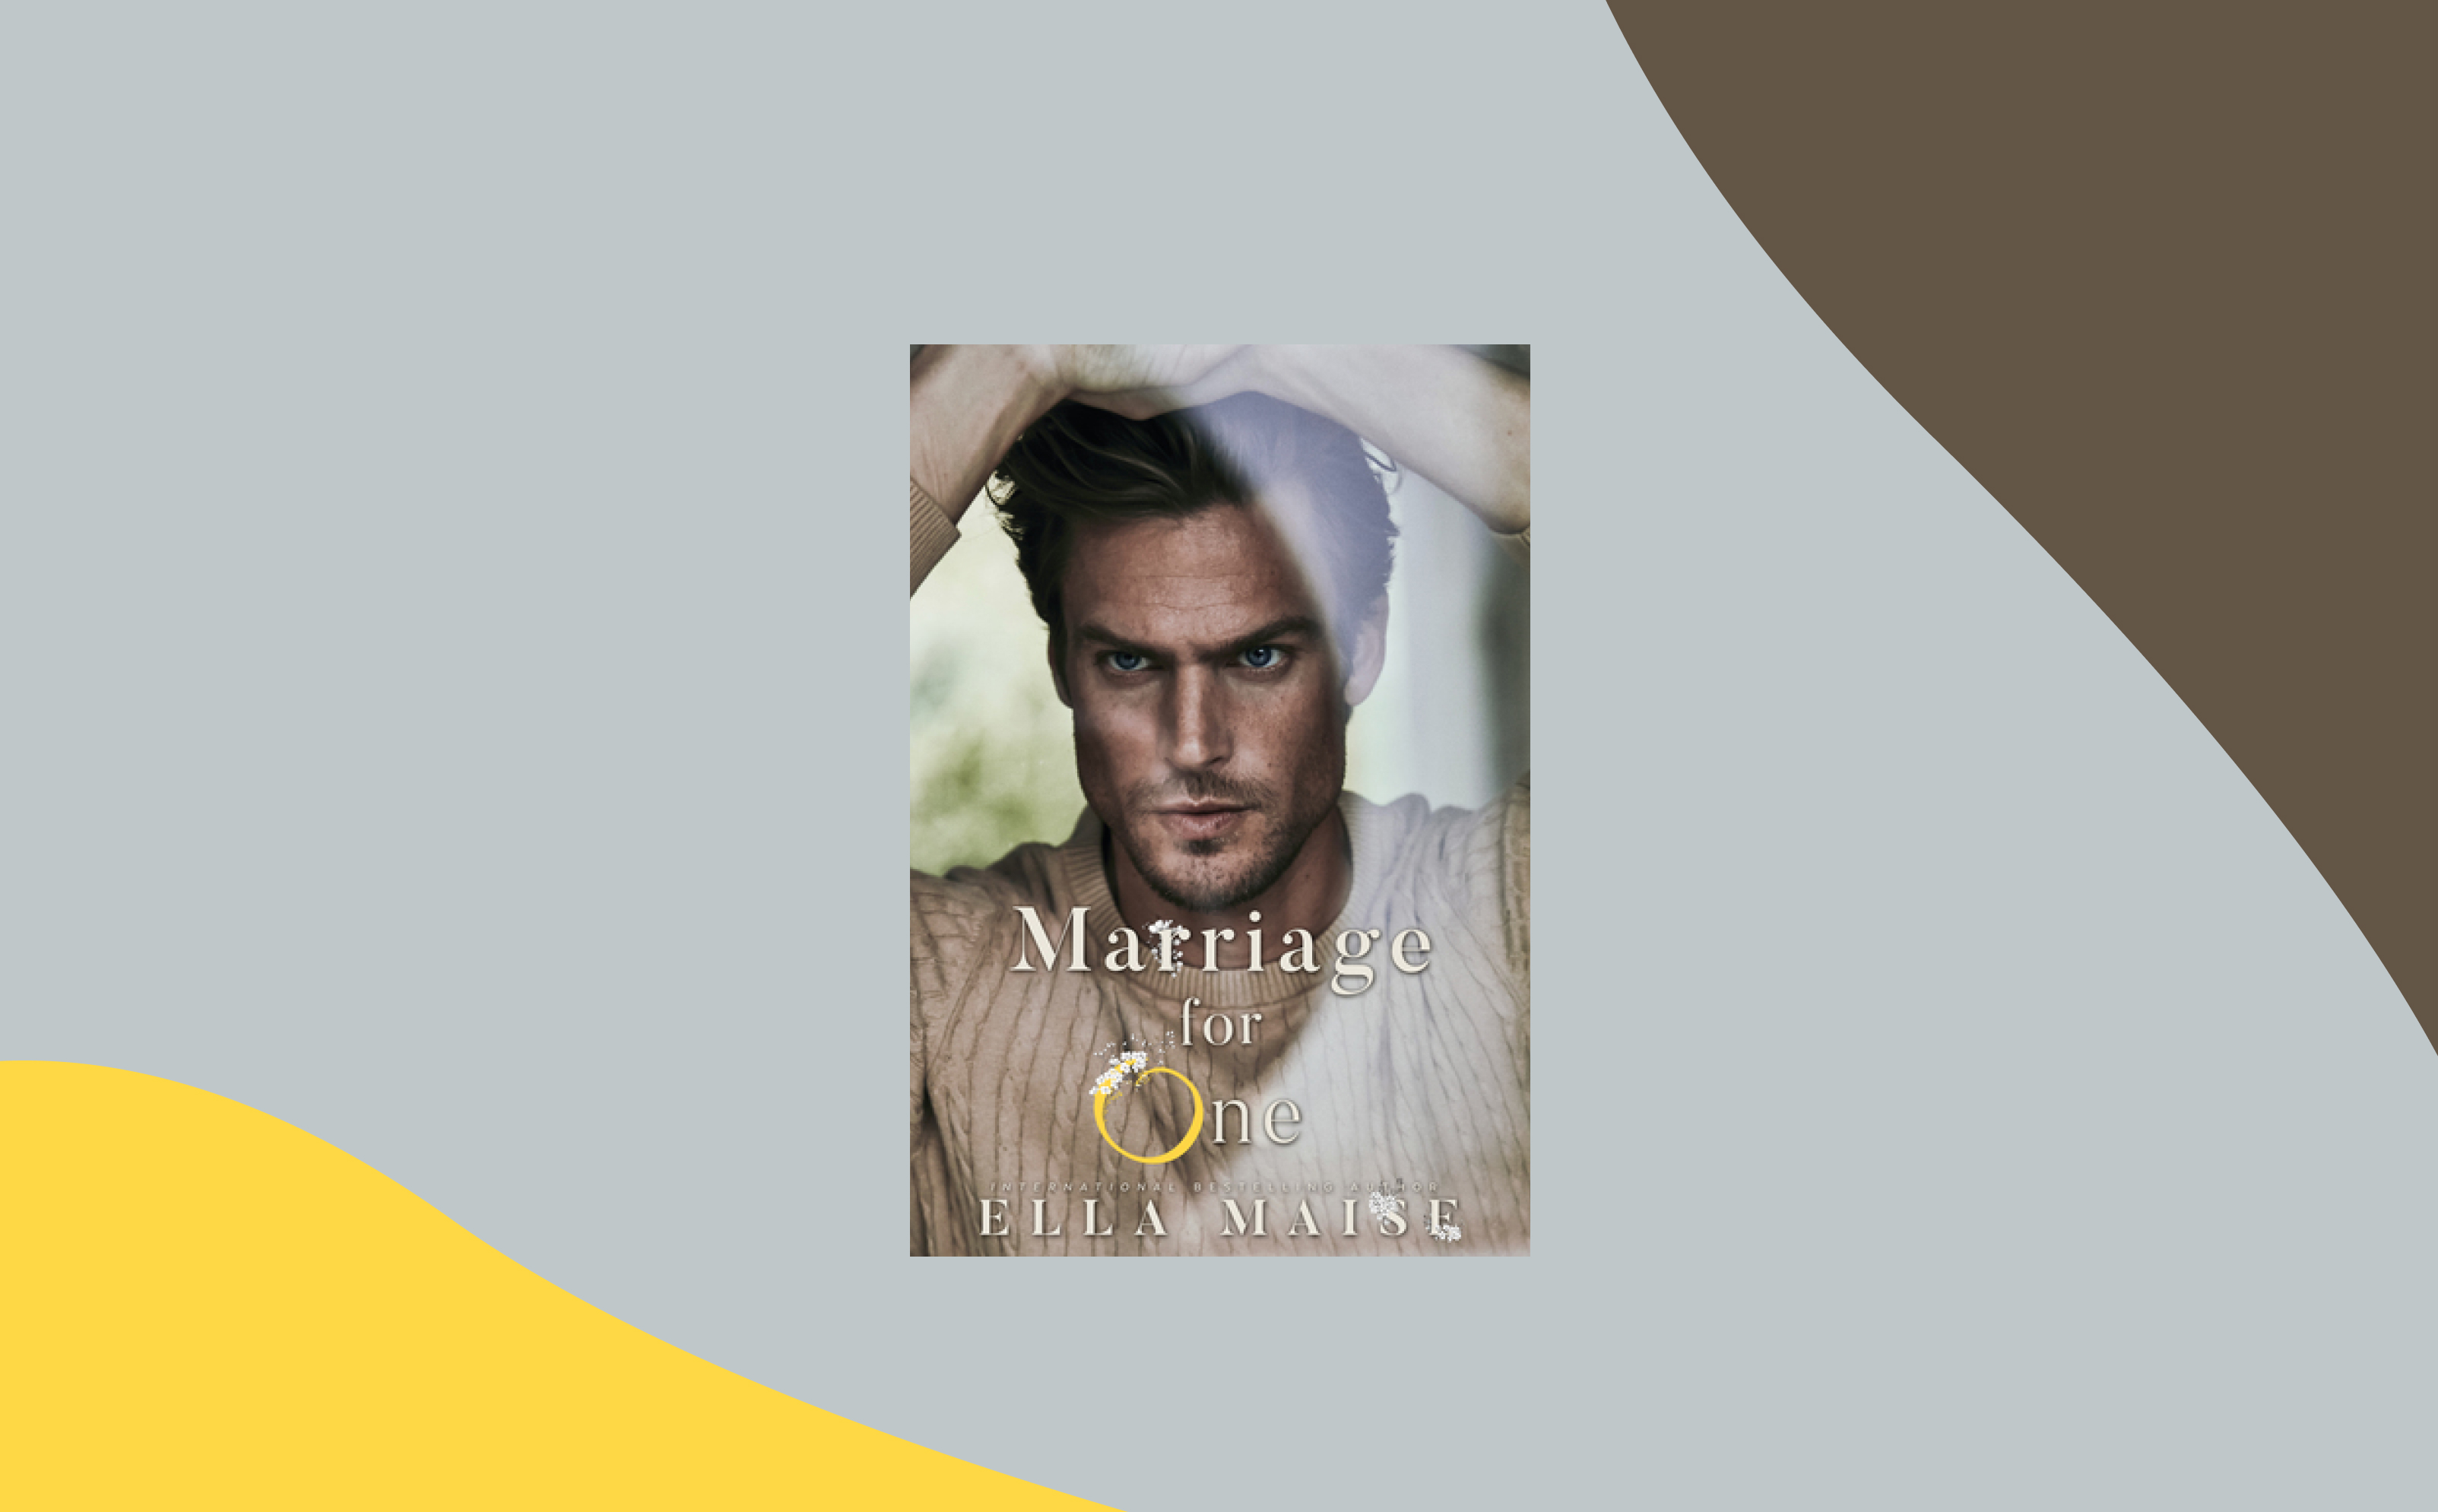 Book review: Marriage for one by Ella Maise